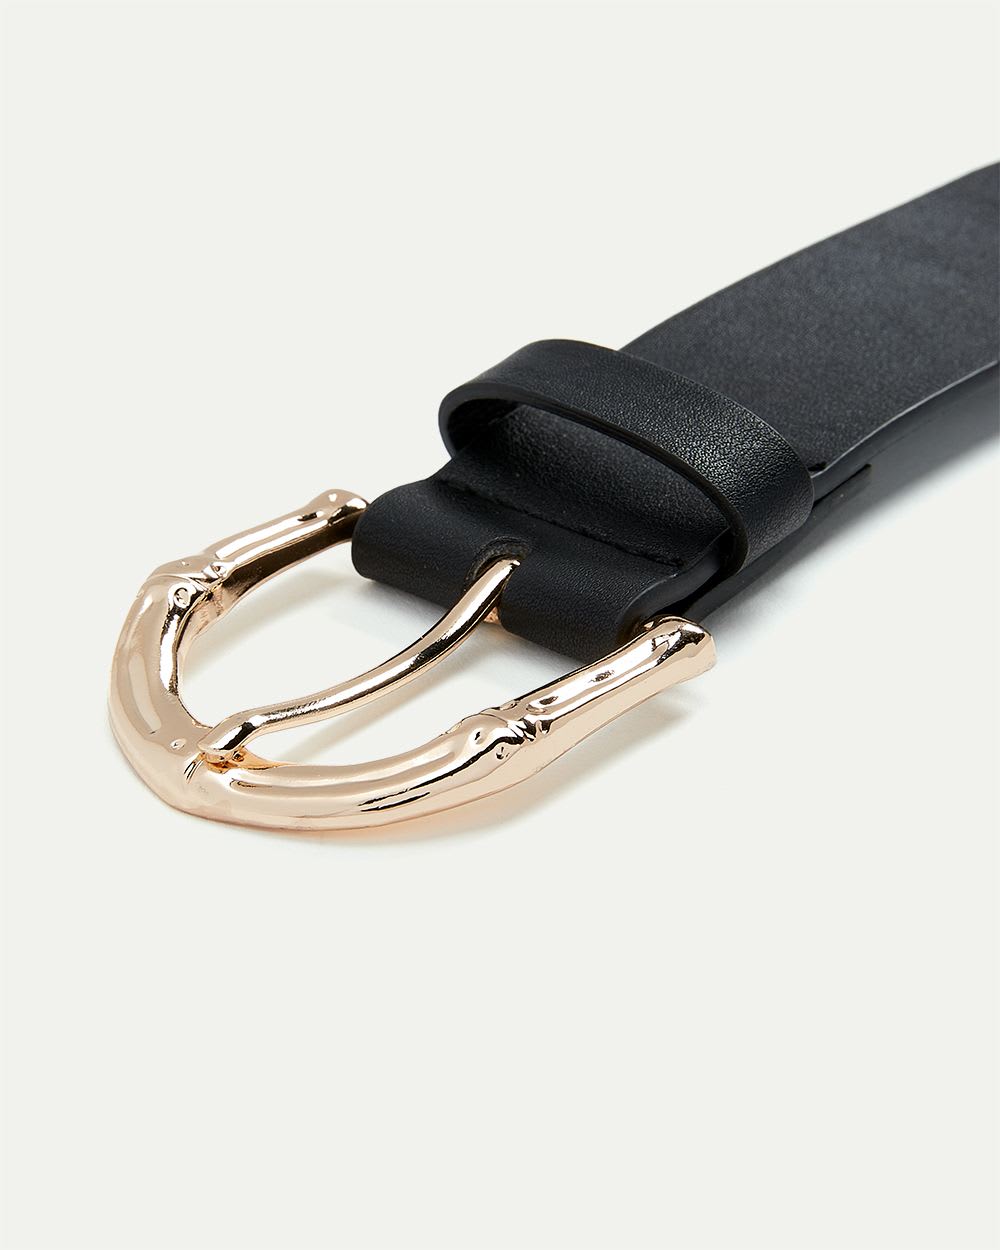 Black Faux Leather Belt with Golden Buckle